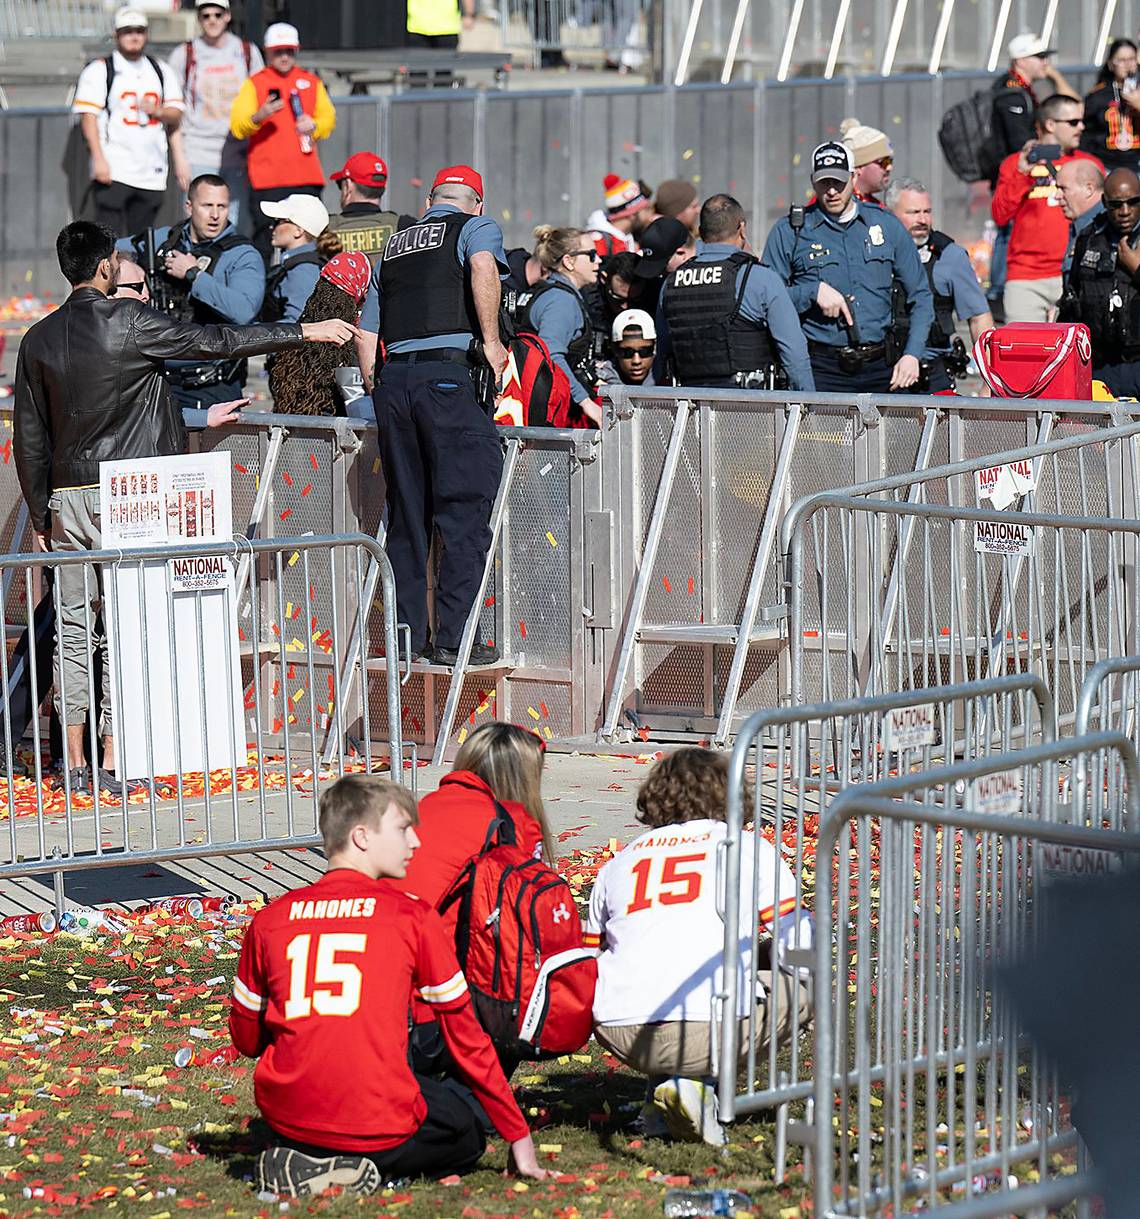 Wichita man who allegedly picked up gun after mass shooting at KC Chiefs rally charged